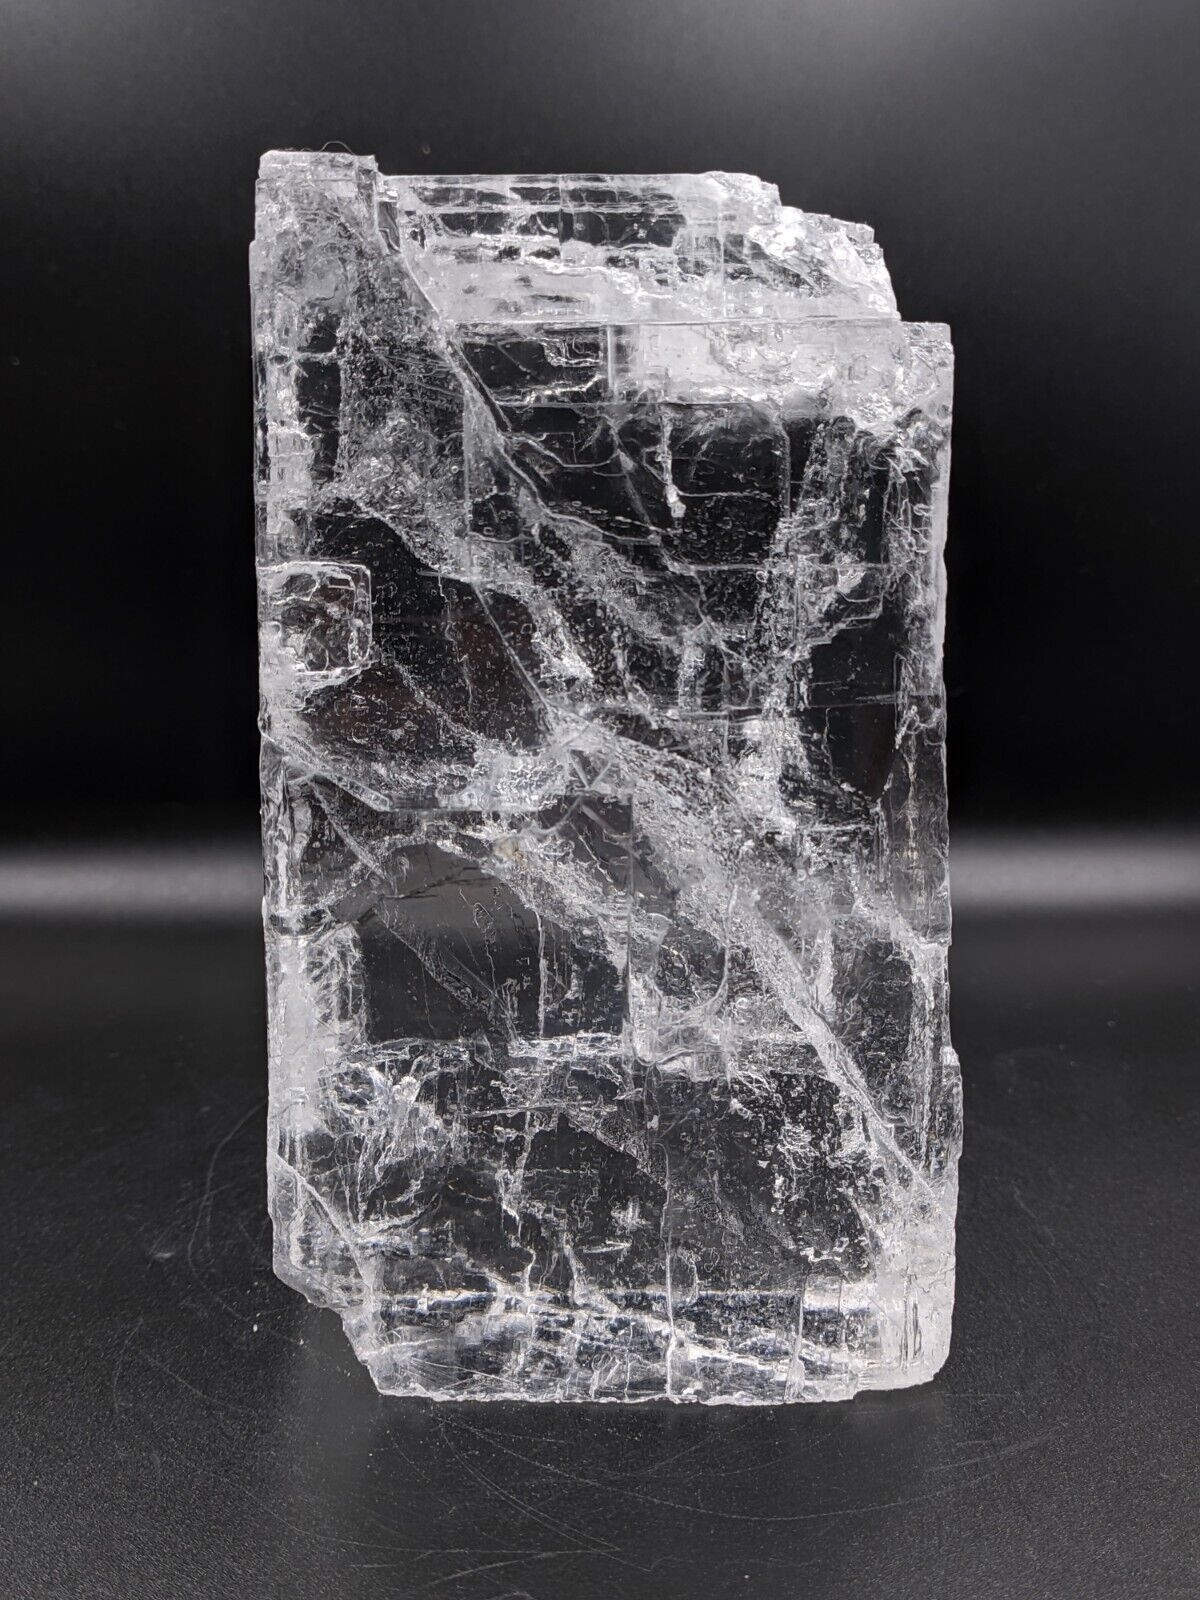 Halite crystal with water and ancient organisms inside,a very rare 1012 g